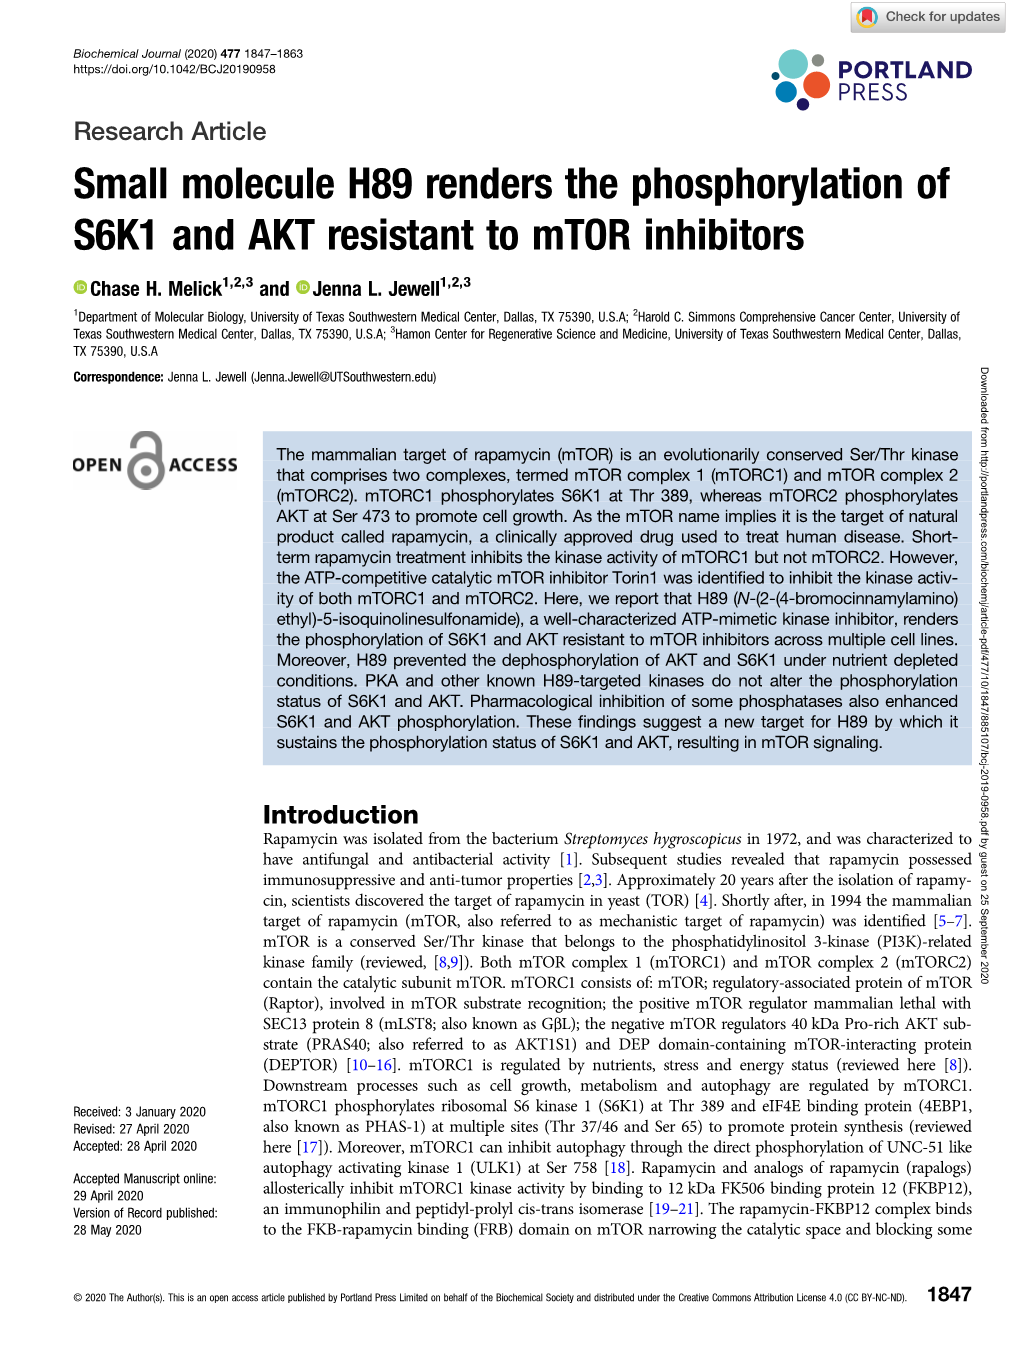 Small Molecule H89 Renders the Phosphorylation of S6K1 and AKT Resistant to Mtor Inhibitors